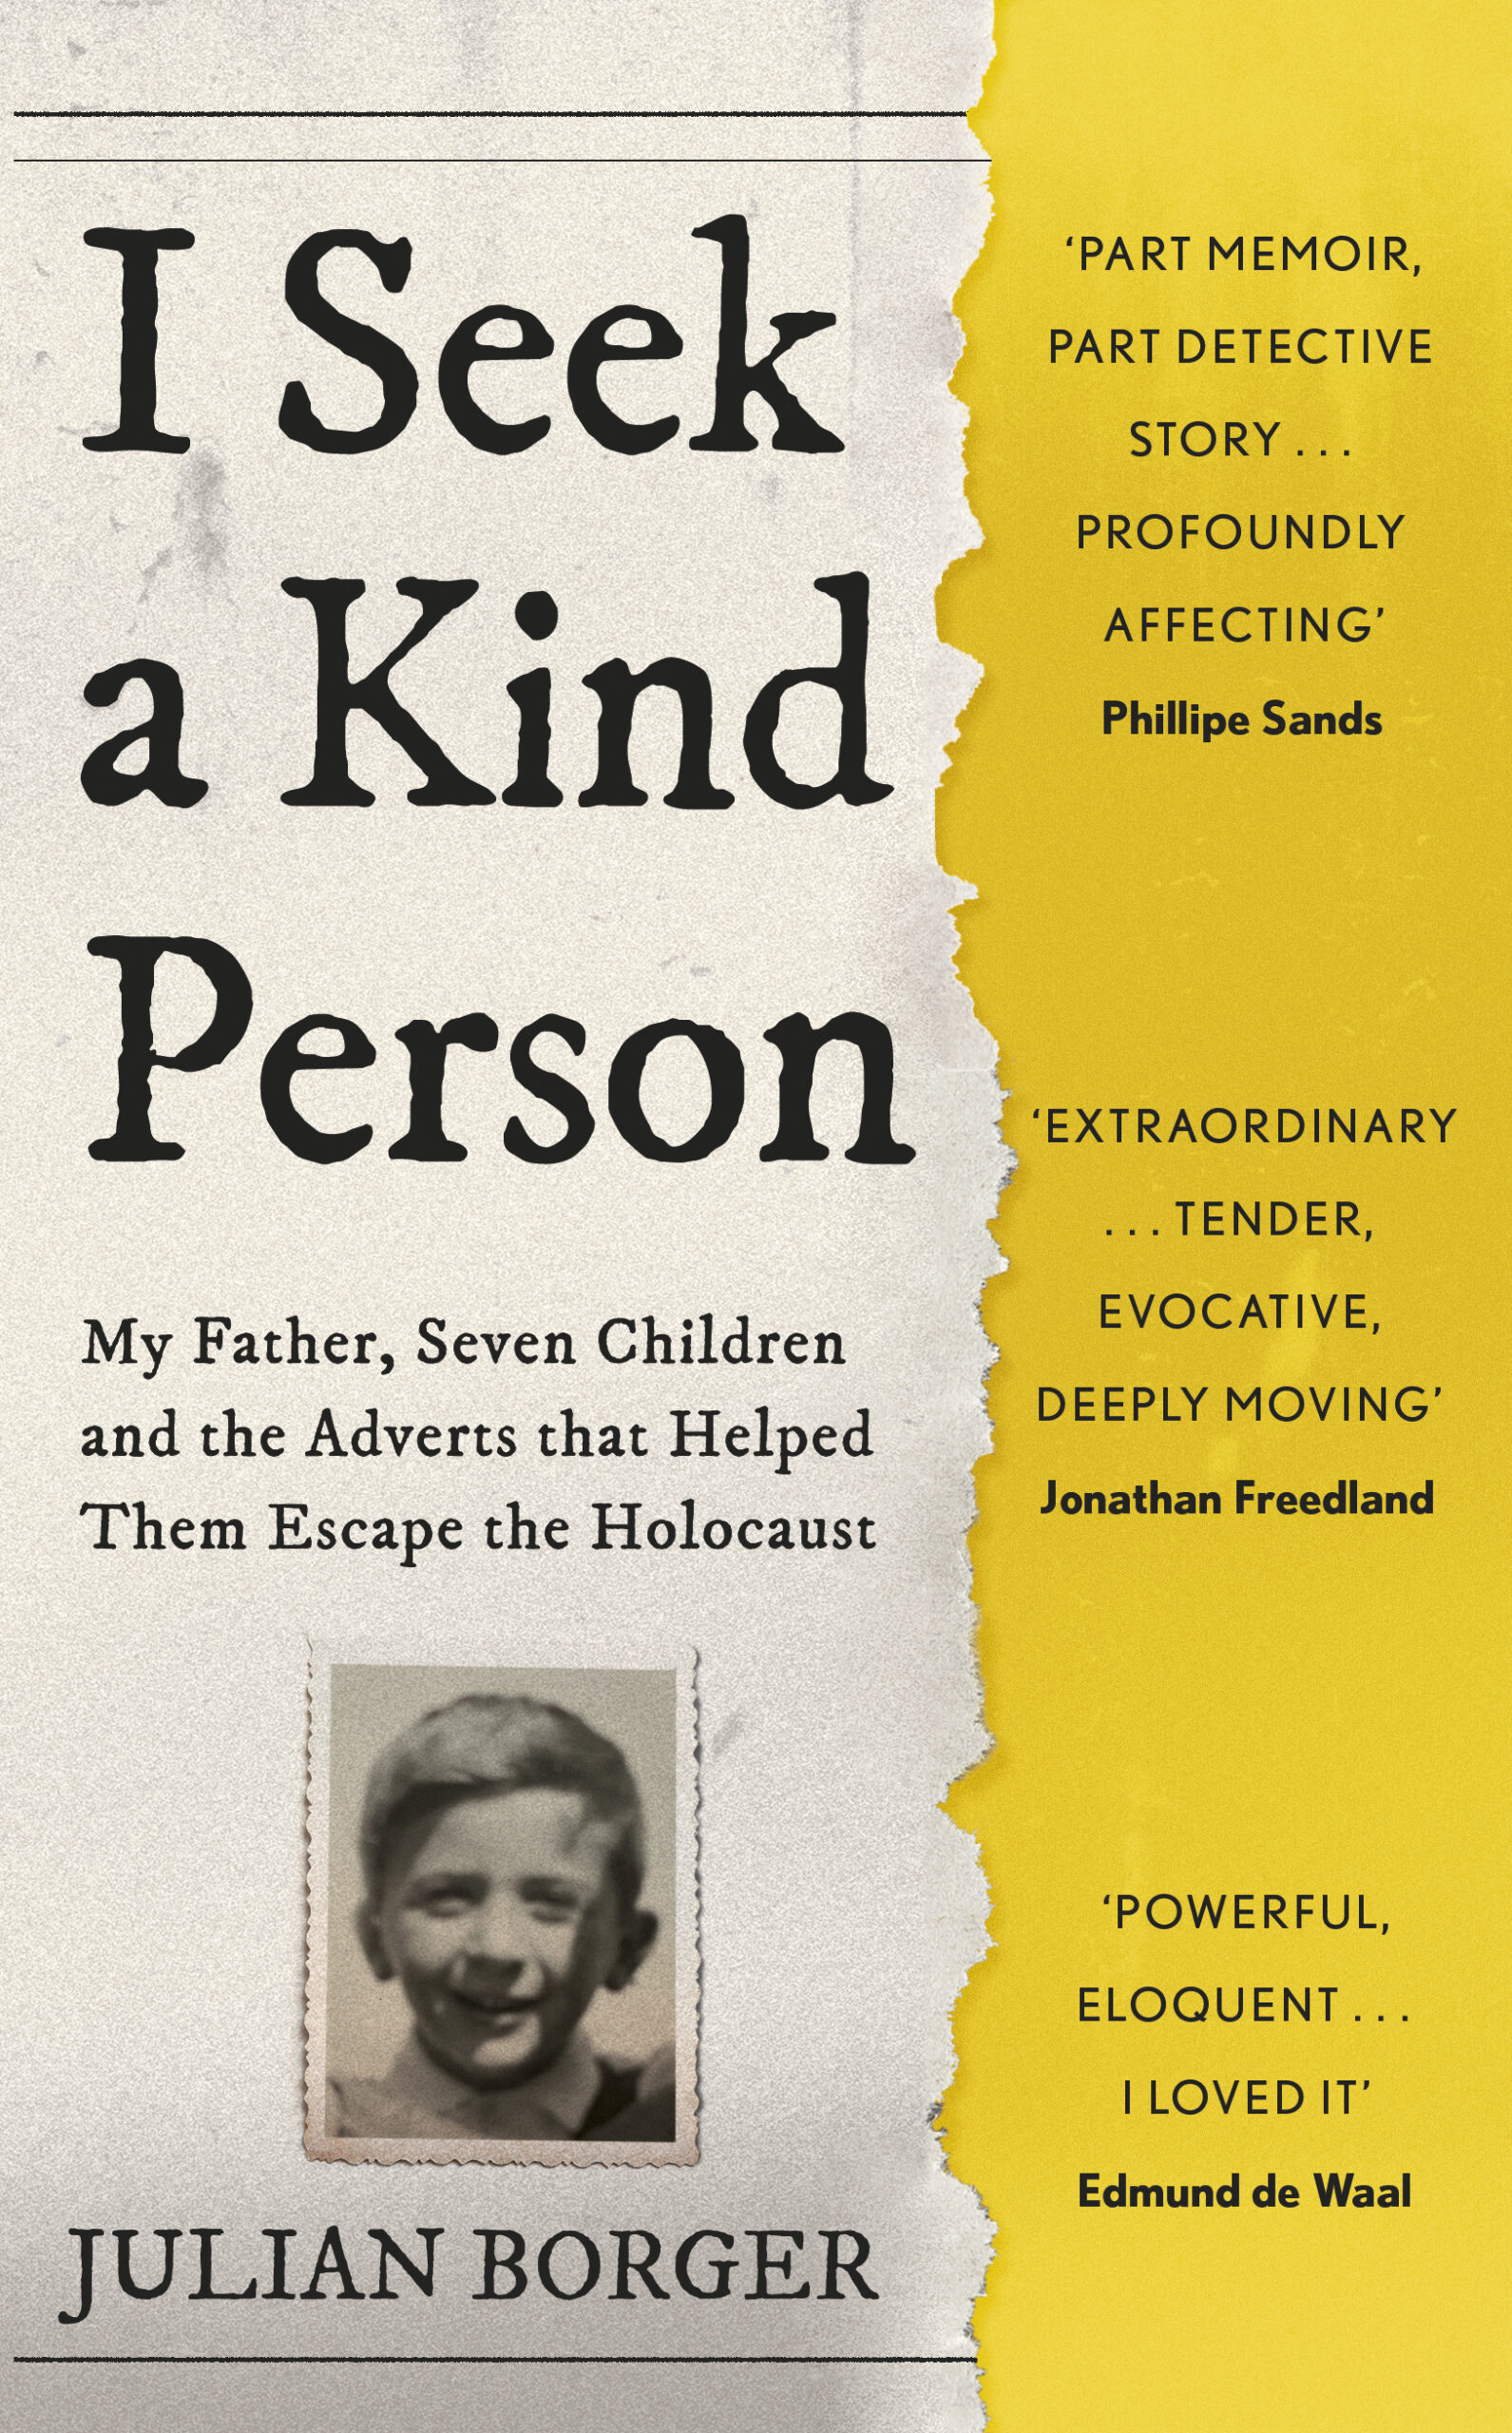 I Seek a Kind Person by Julian Borger book cover